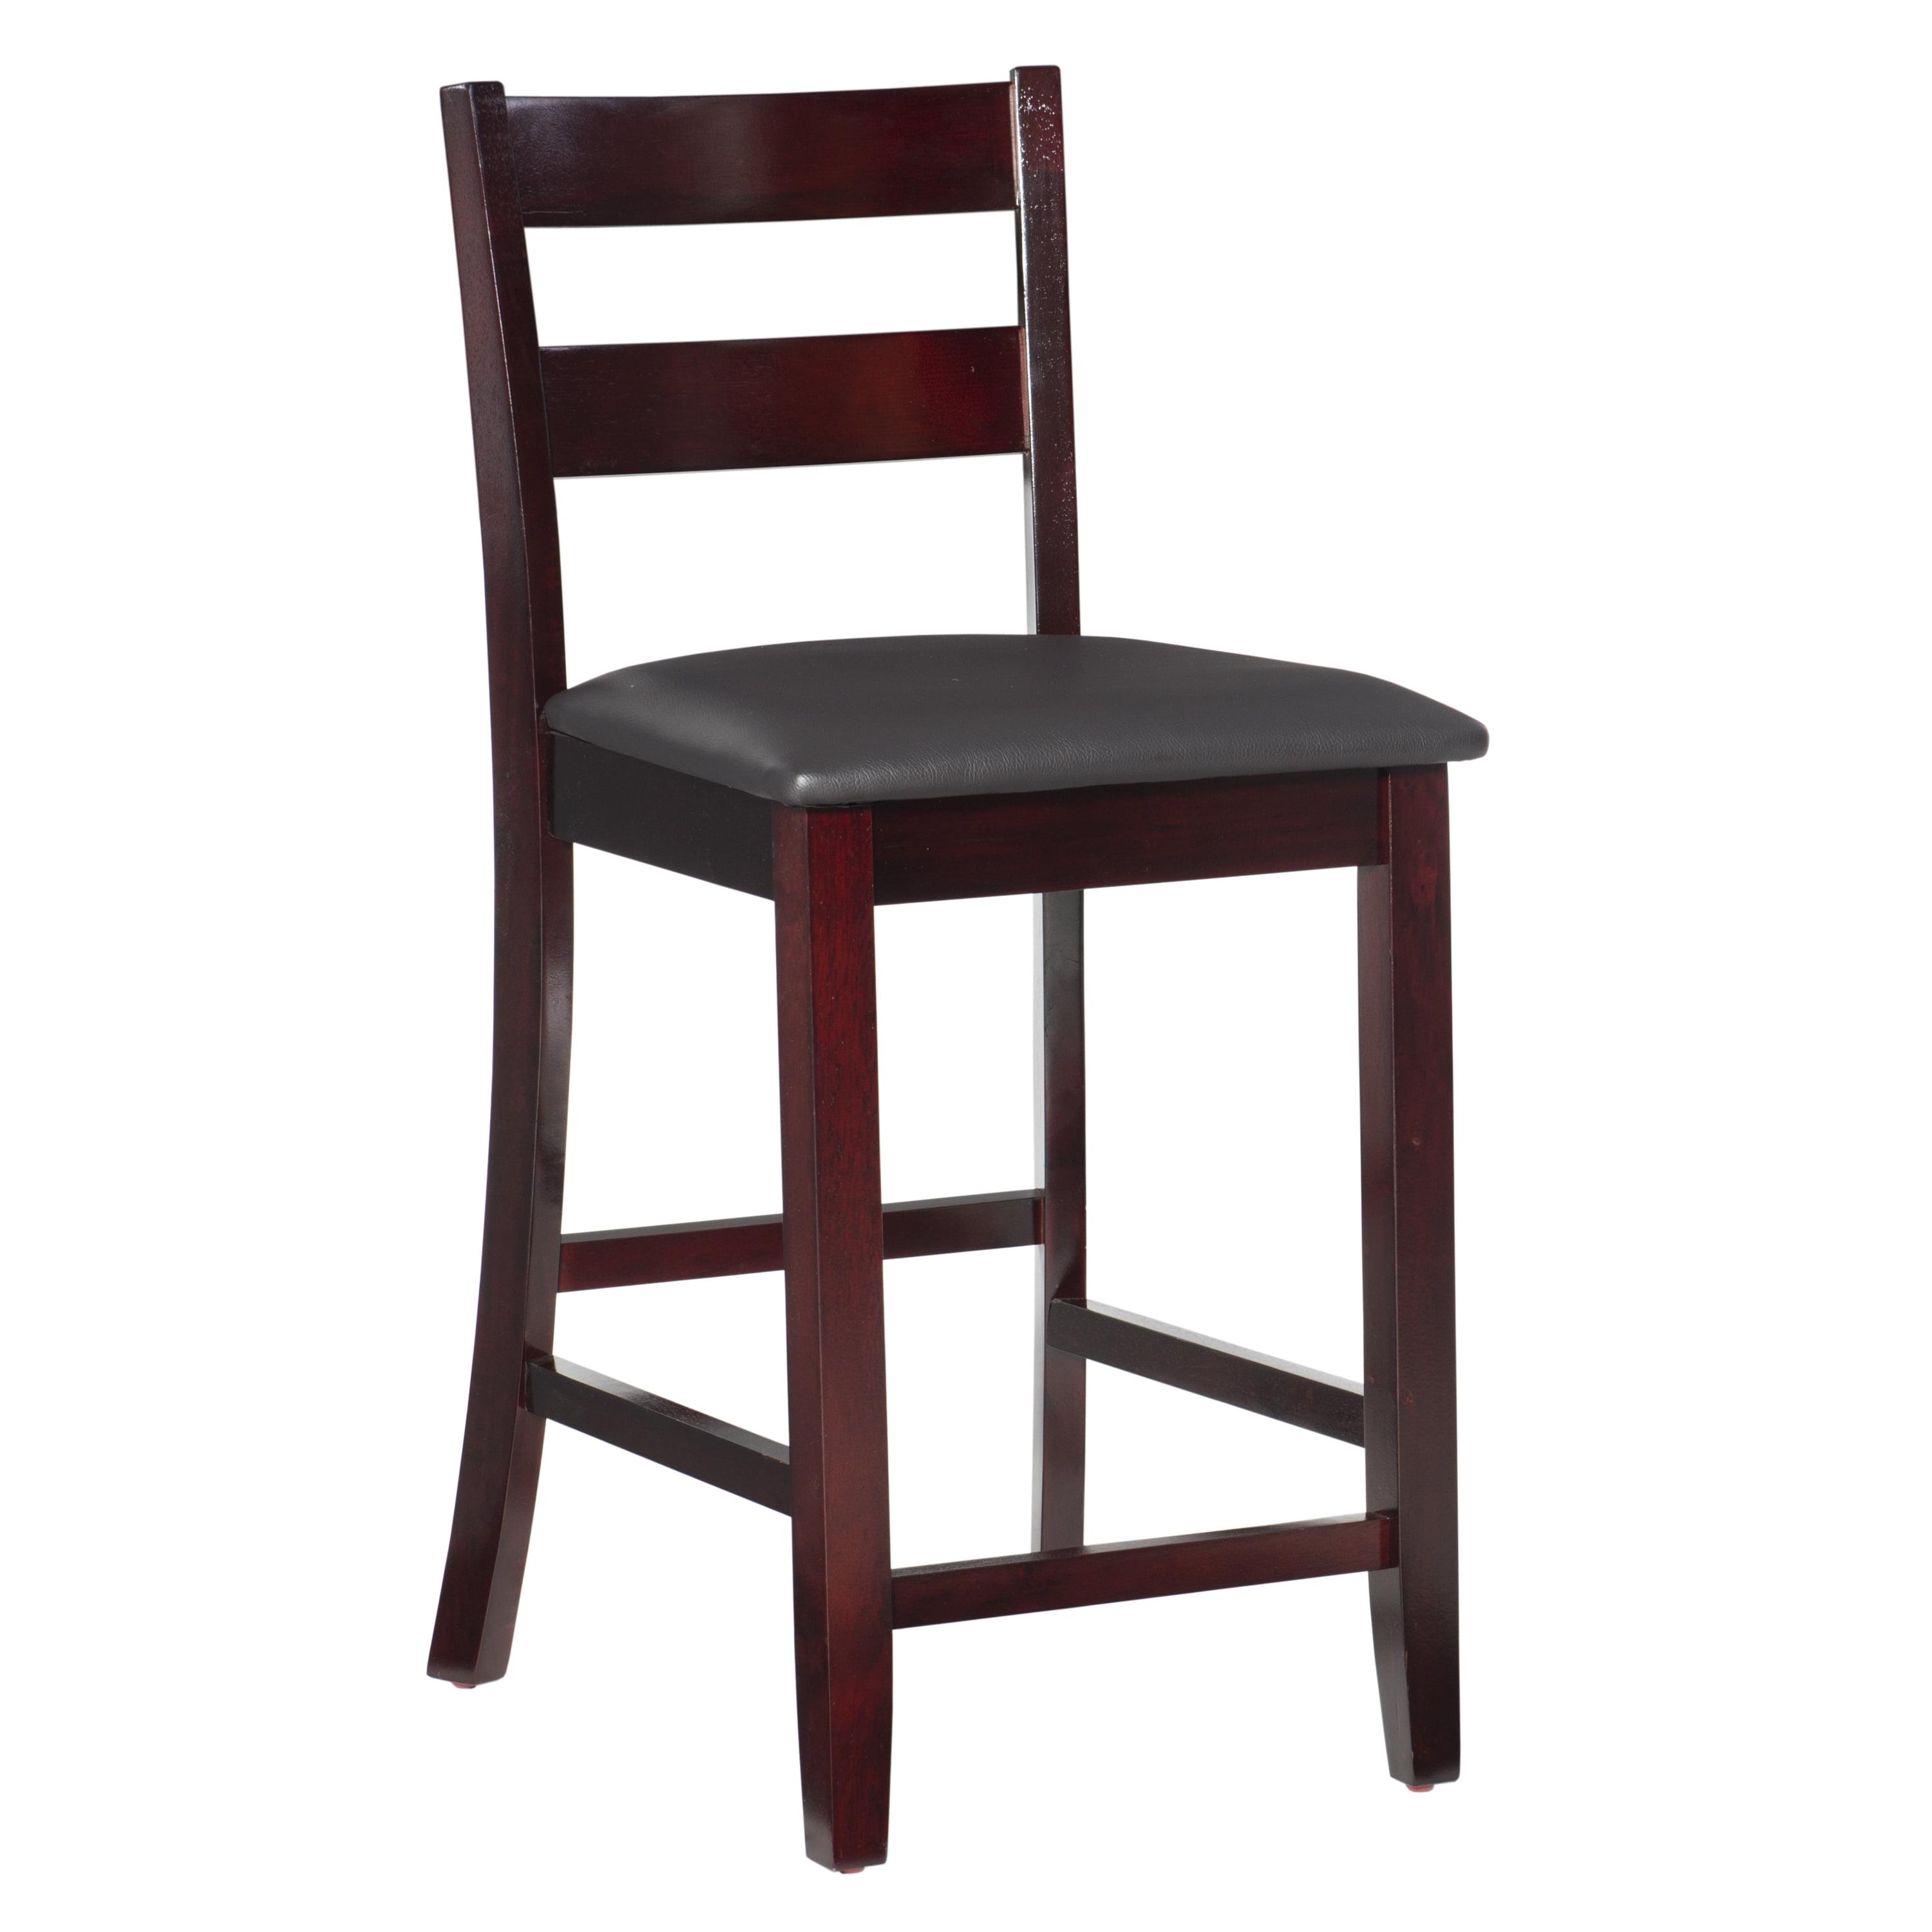 Triena Soho 24" Dark Cherry Wood and Brown Faux Leather Counter Stool